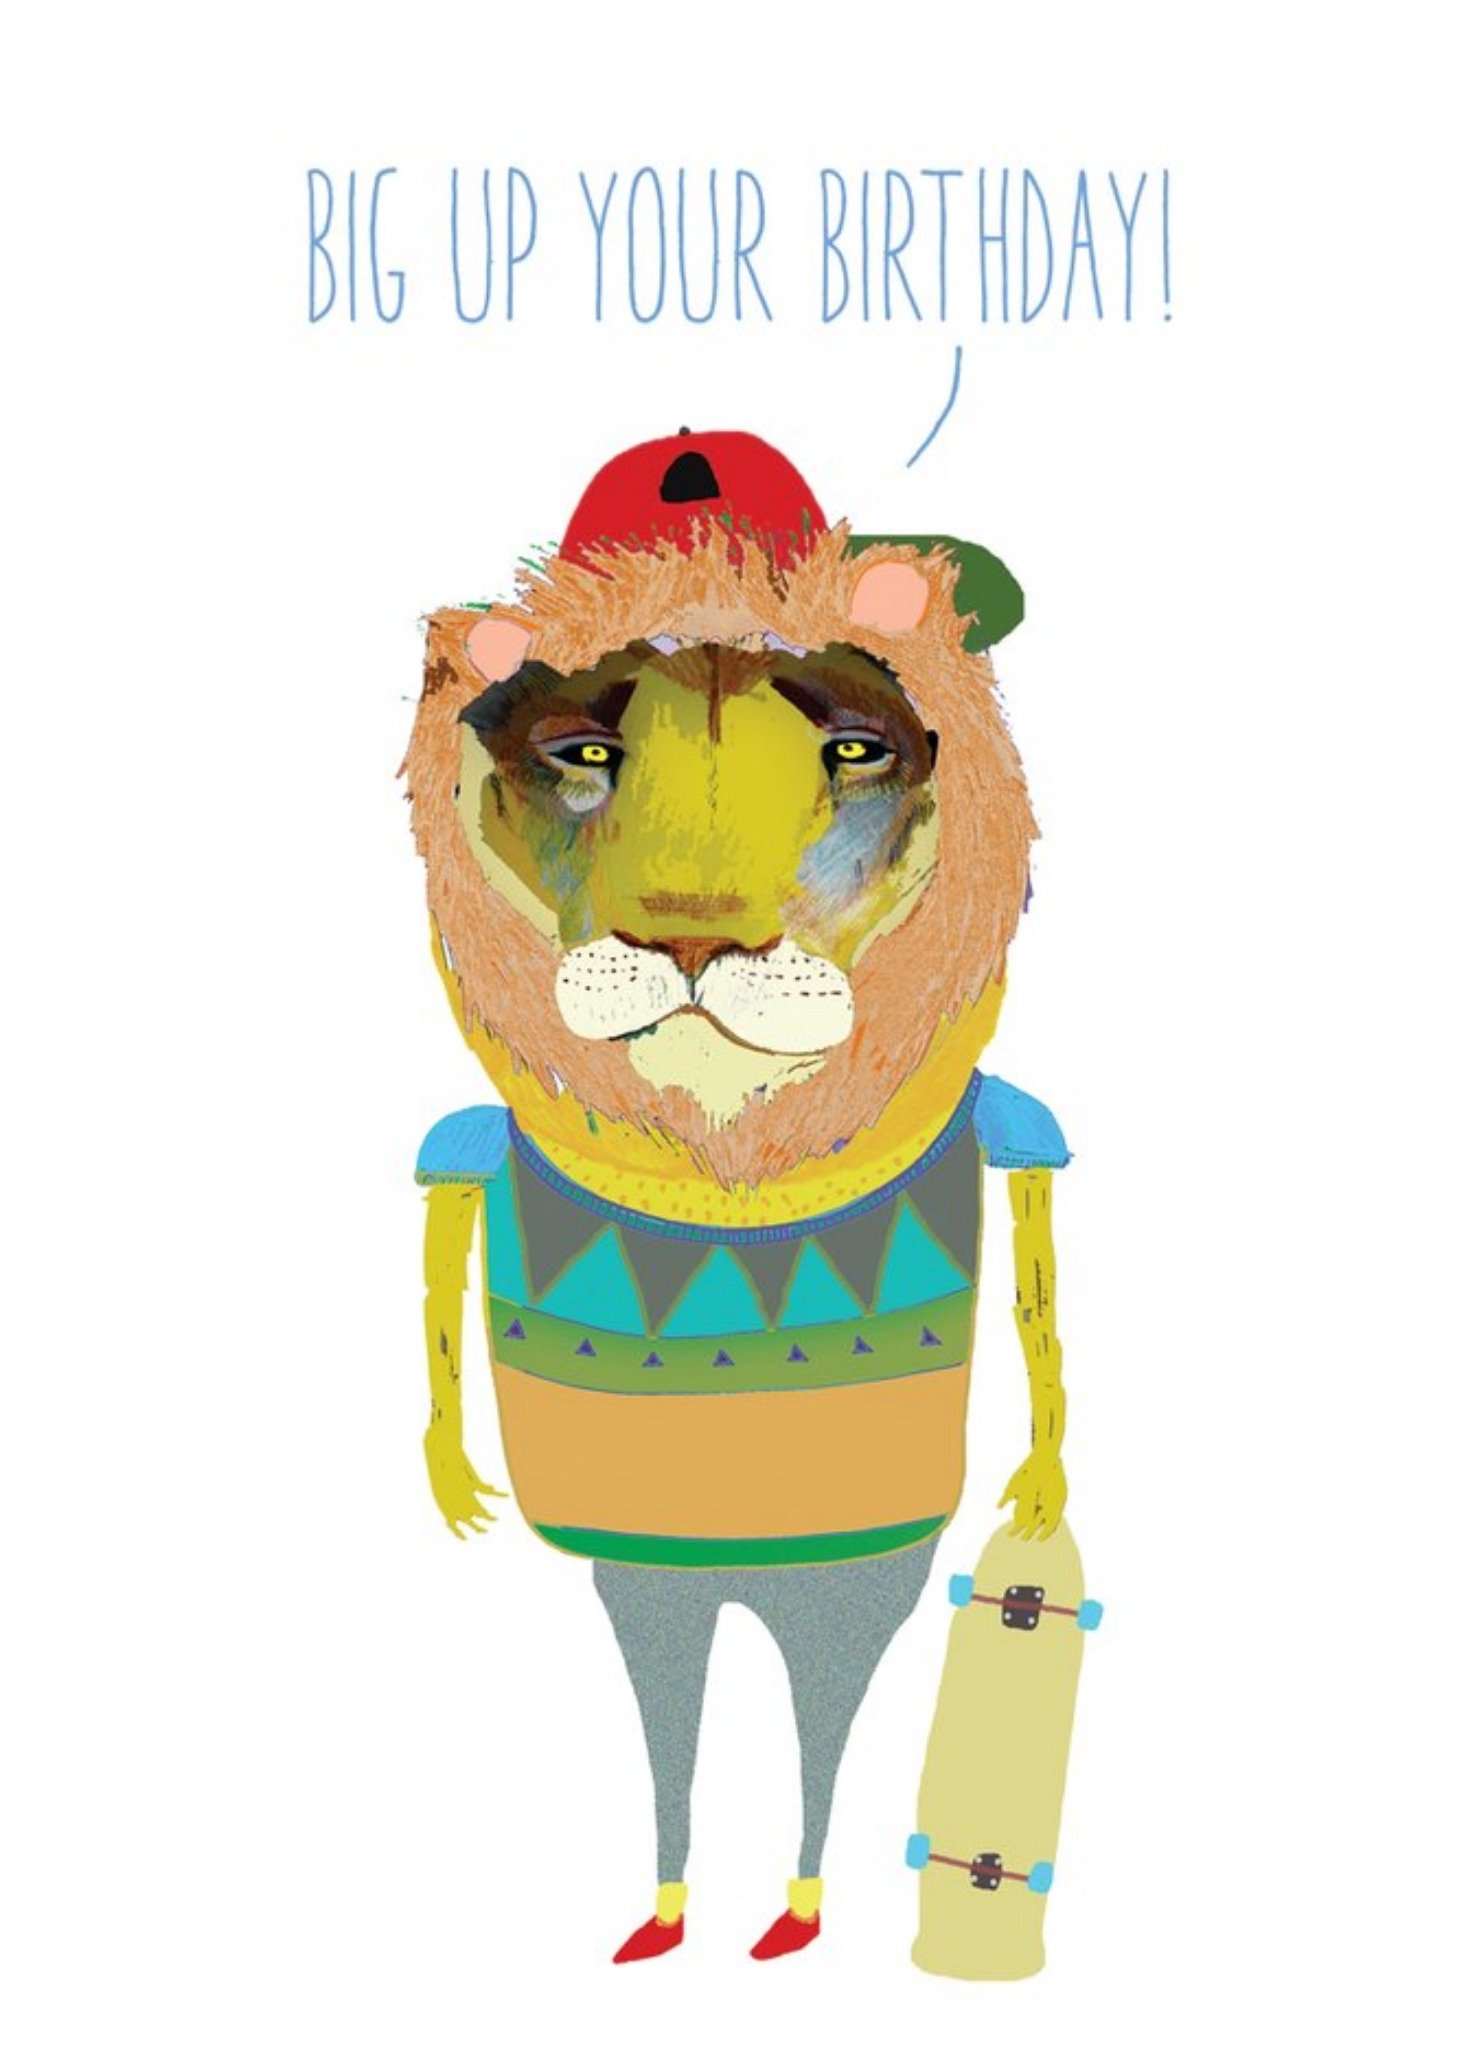 Brainbox Candy Funny Lion Skateboard Big Up Your Birthday Card, Large